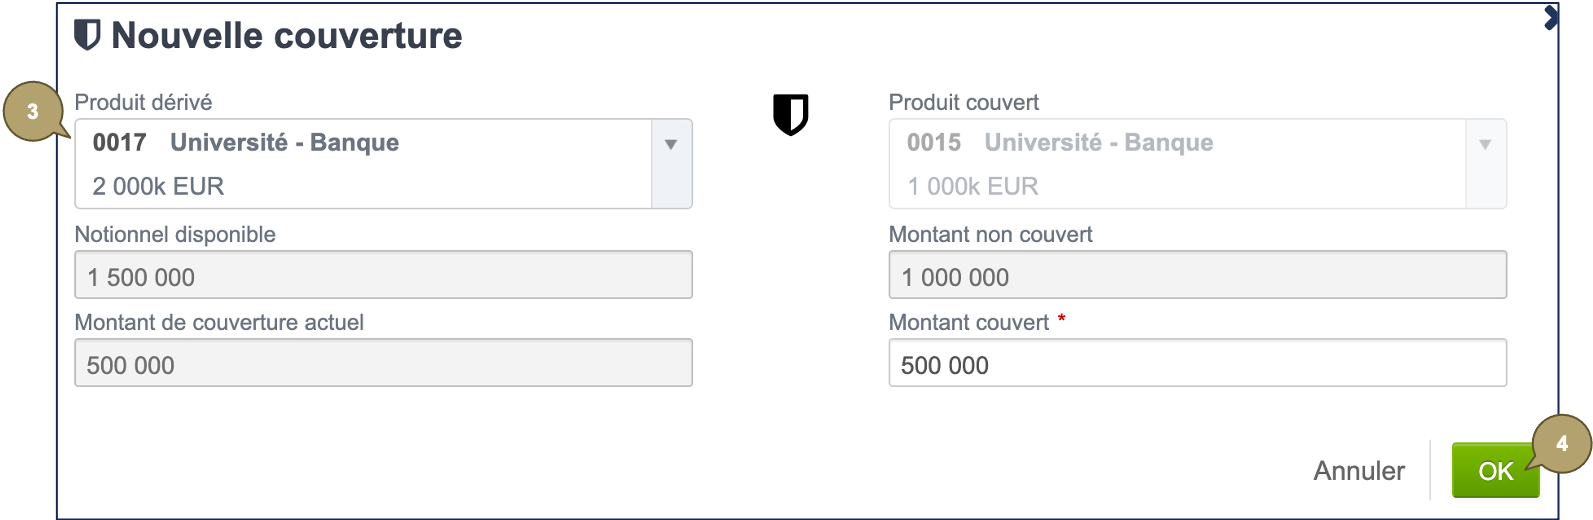 Allocation_Create_FR.png